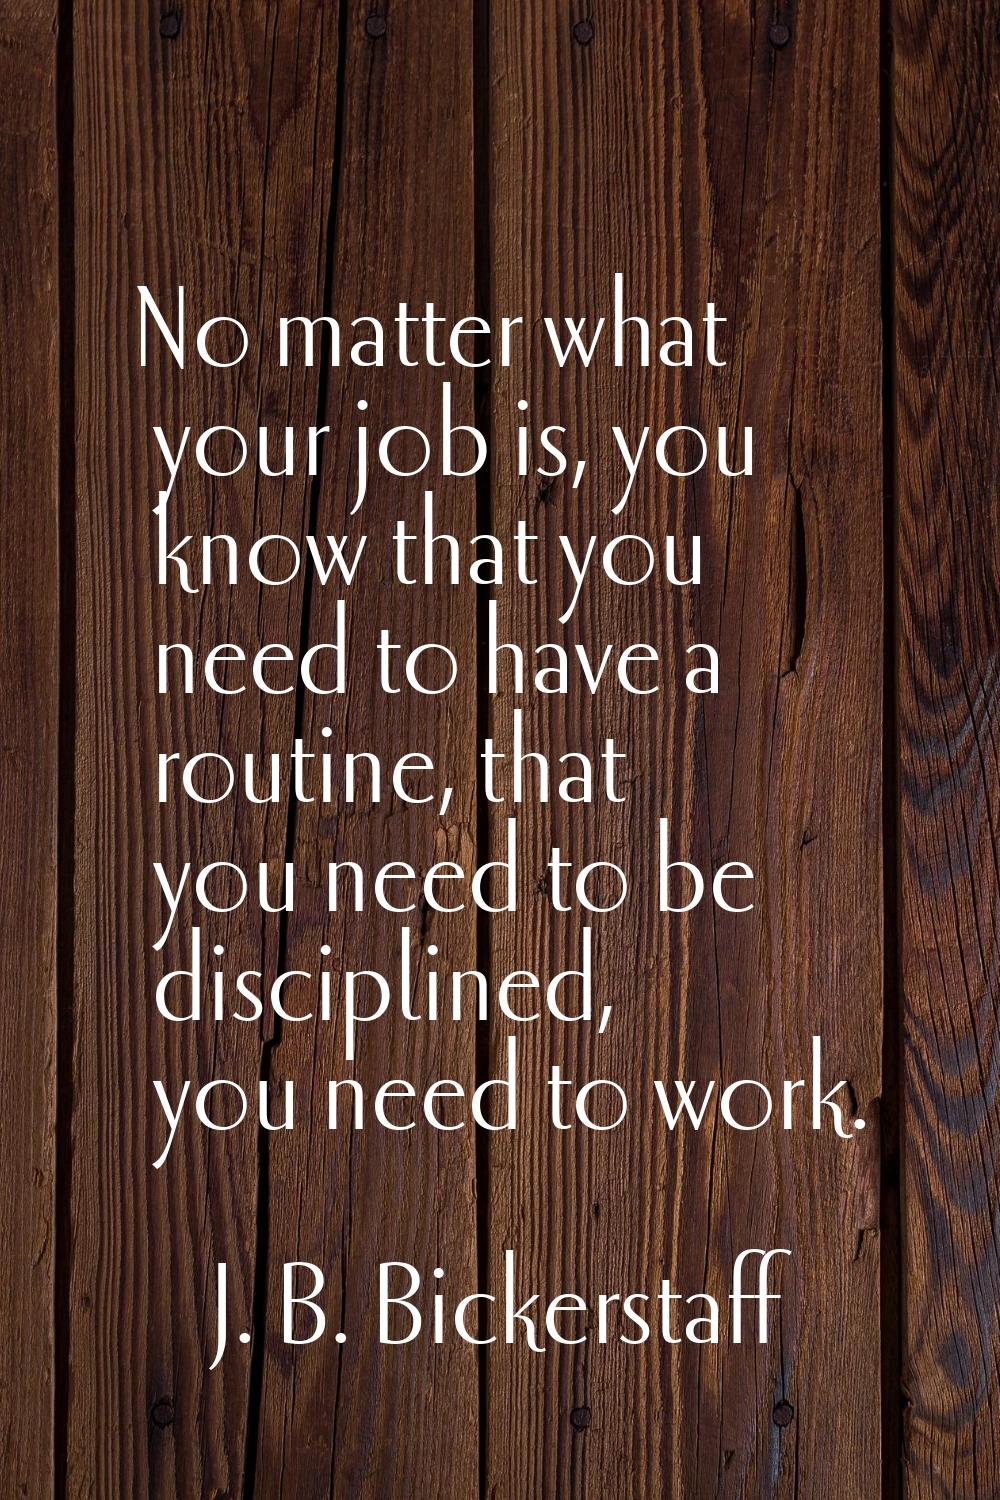 No matter what your job is, you know that you need to have a routine, that you need to be disciplin